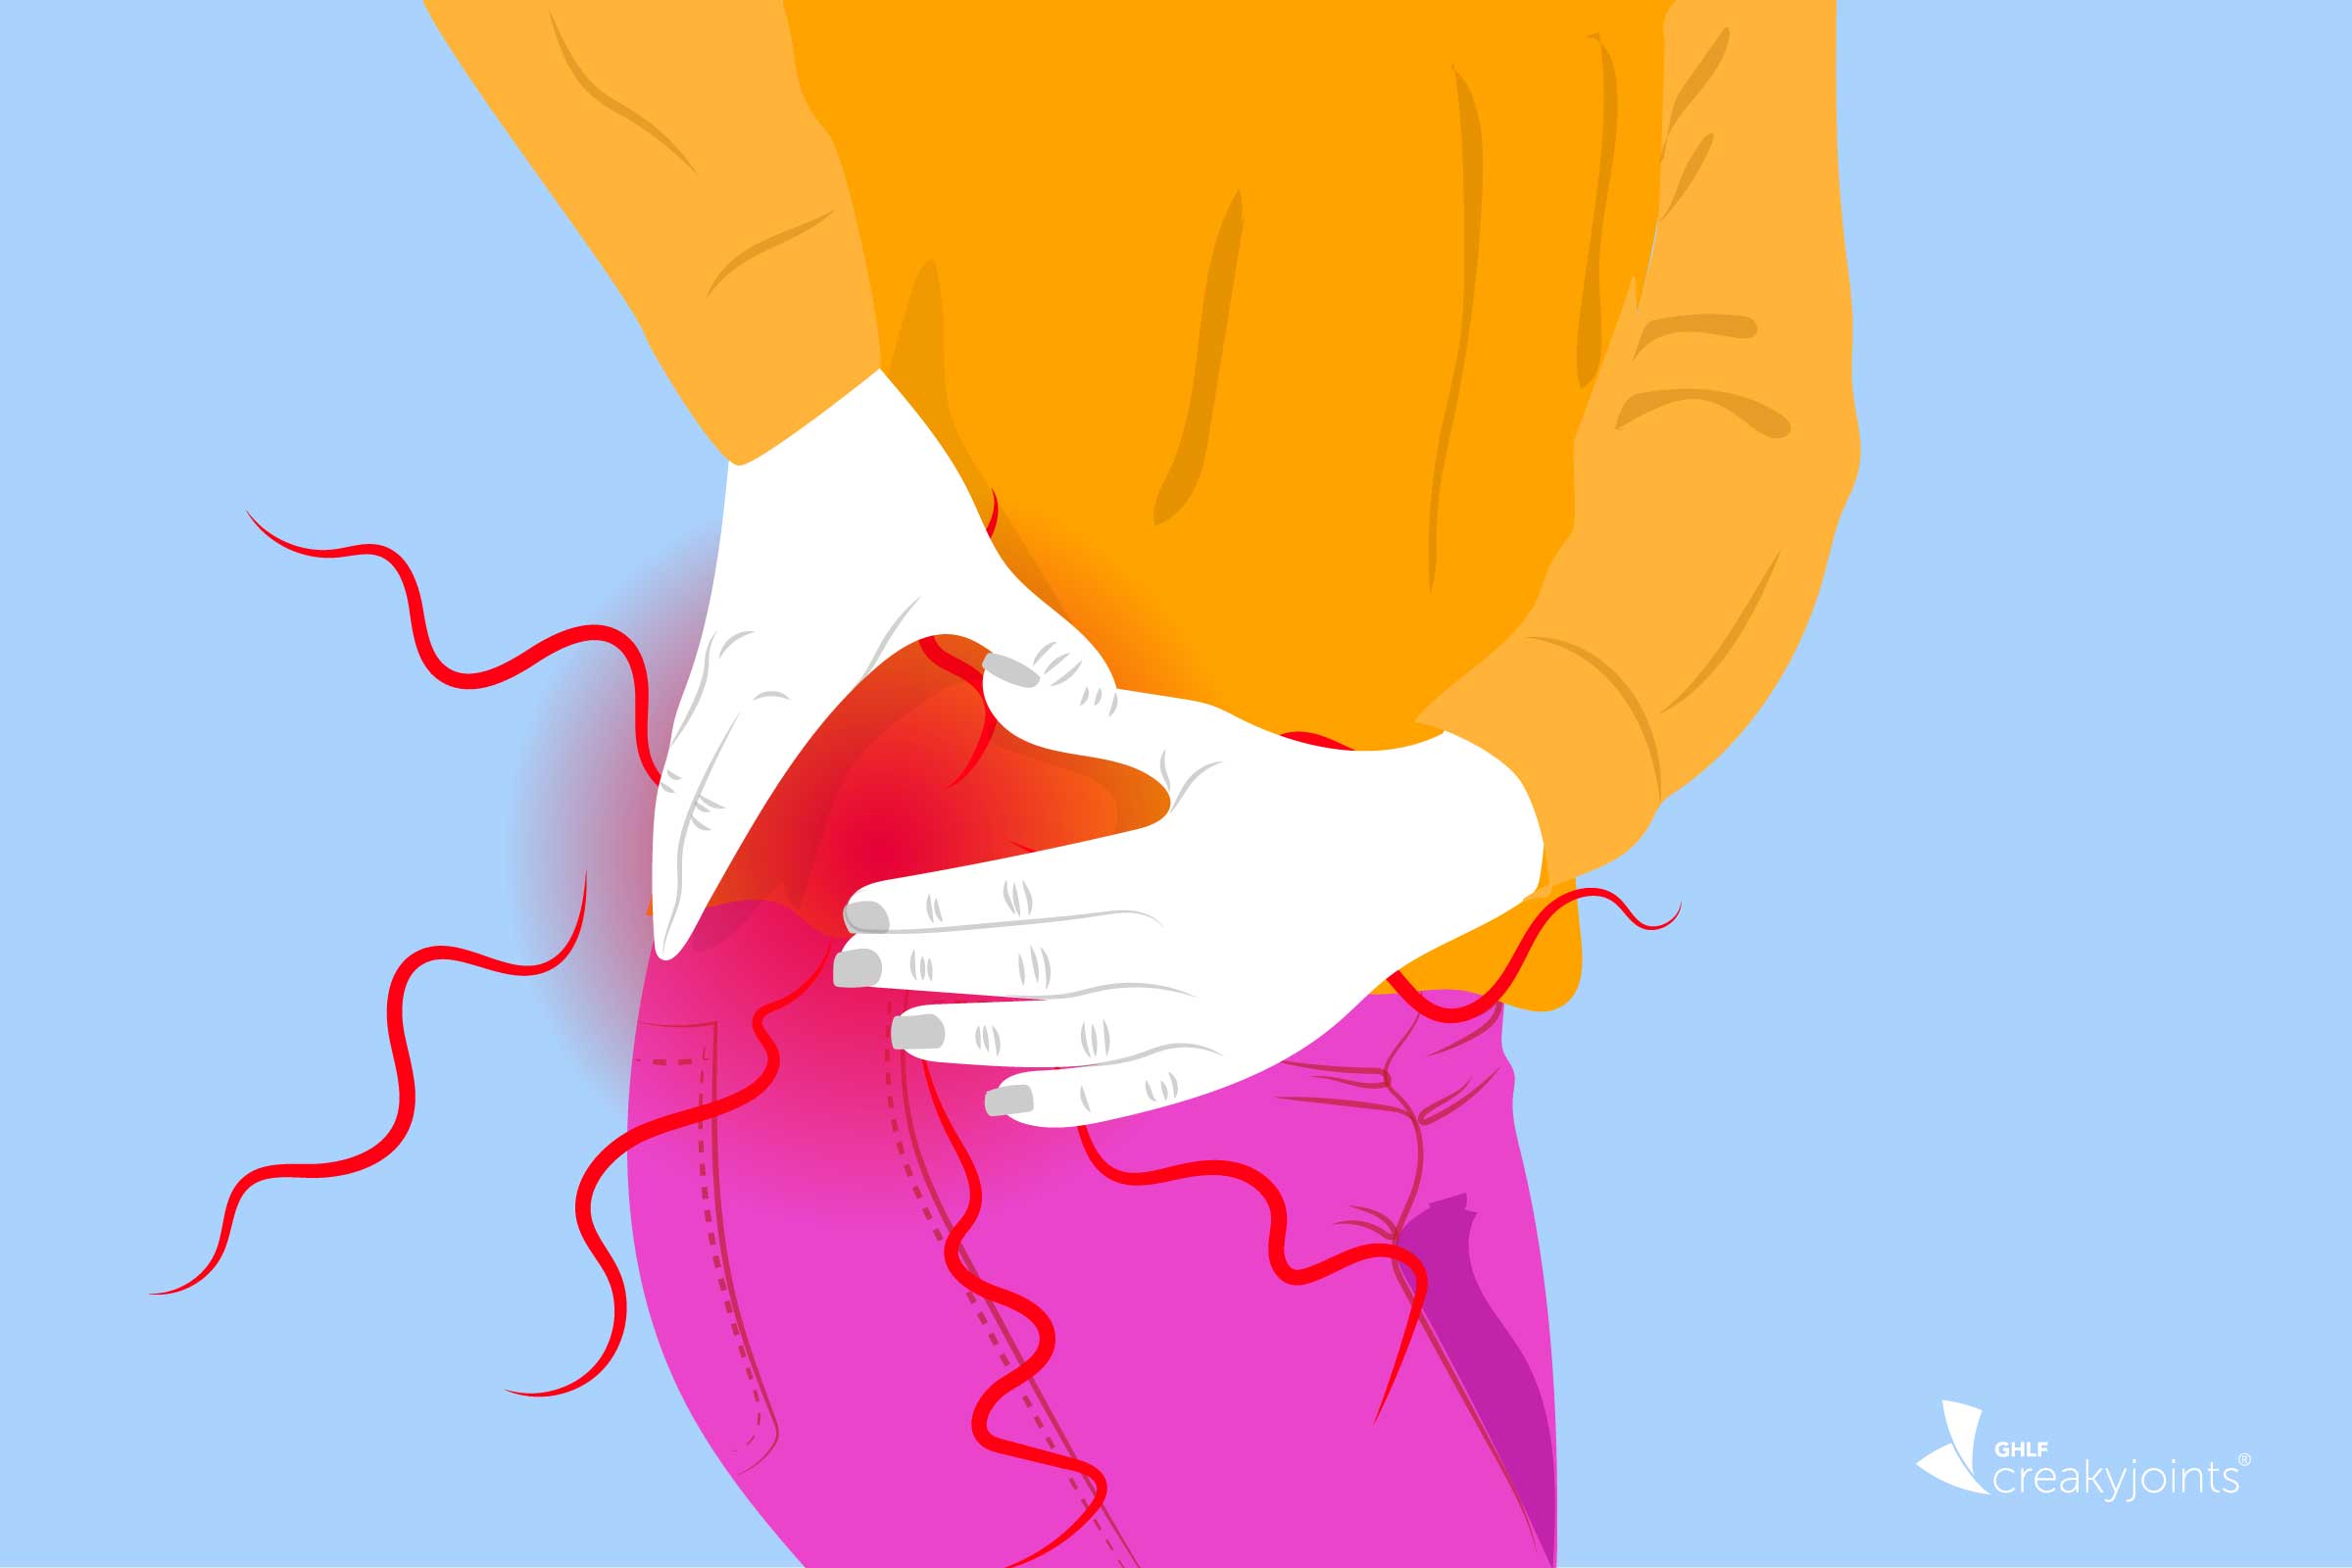 10 Ways to Recover from Hip Pain at Night